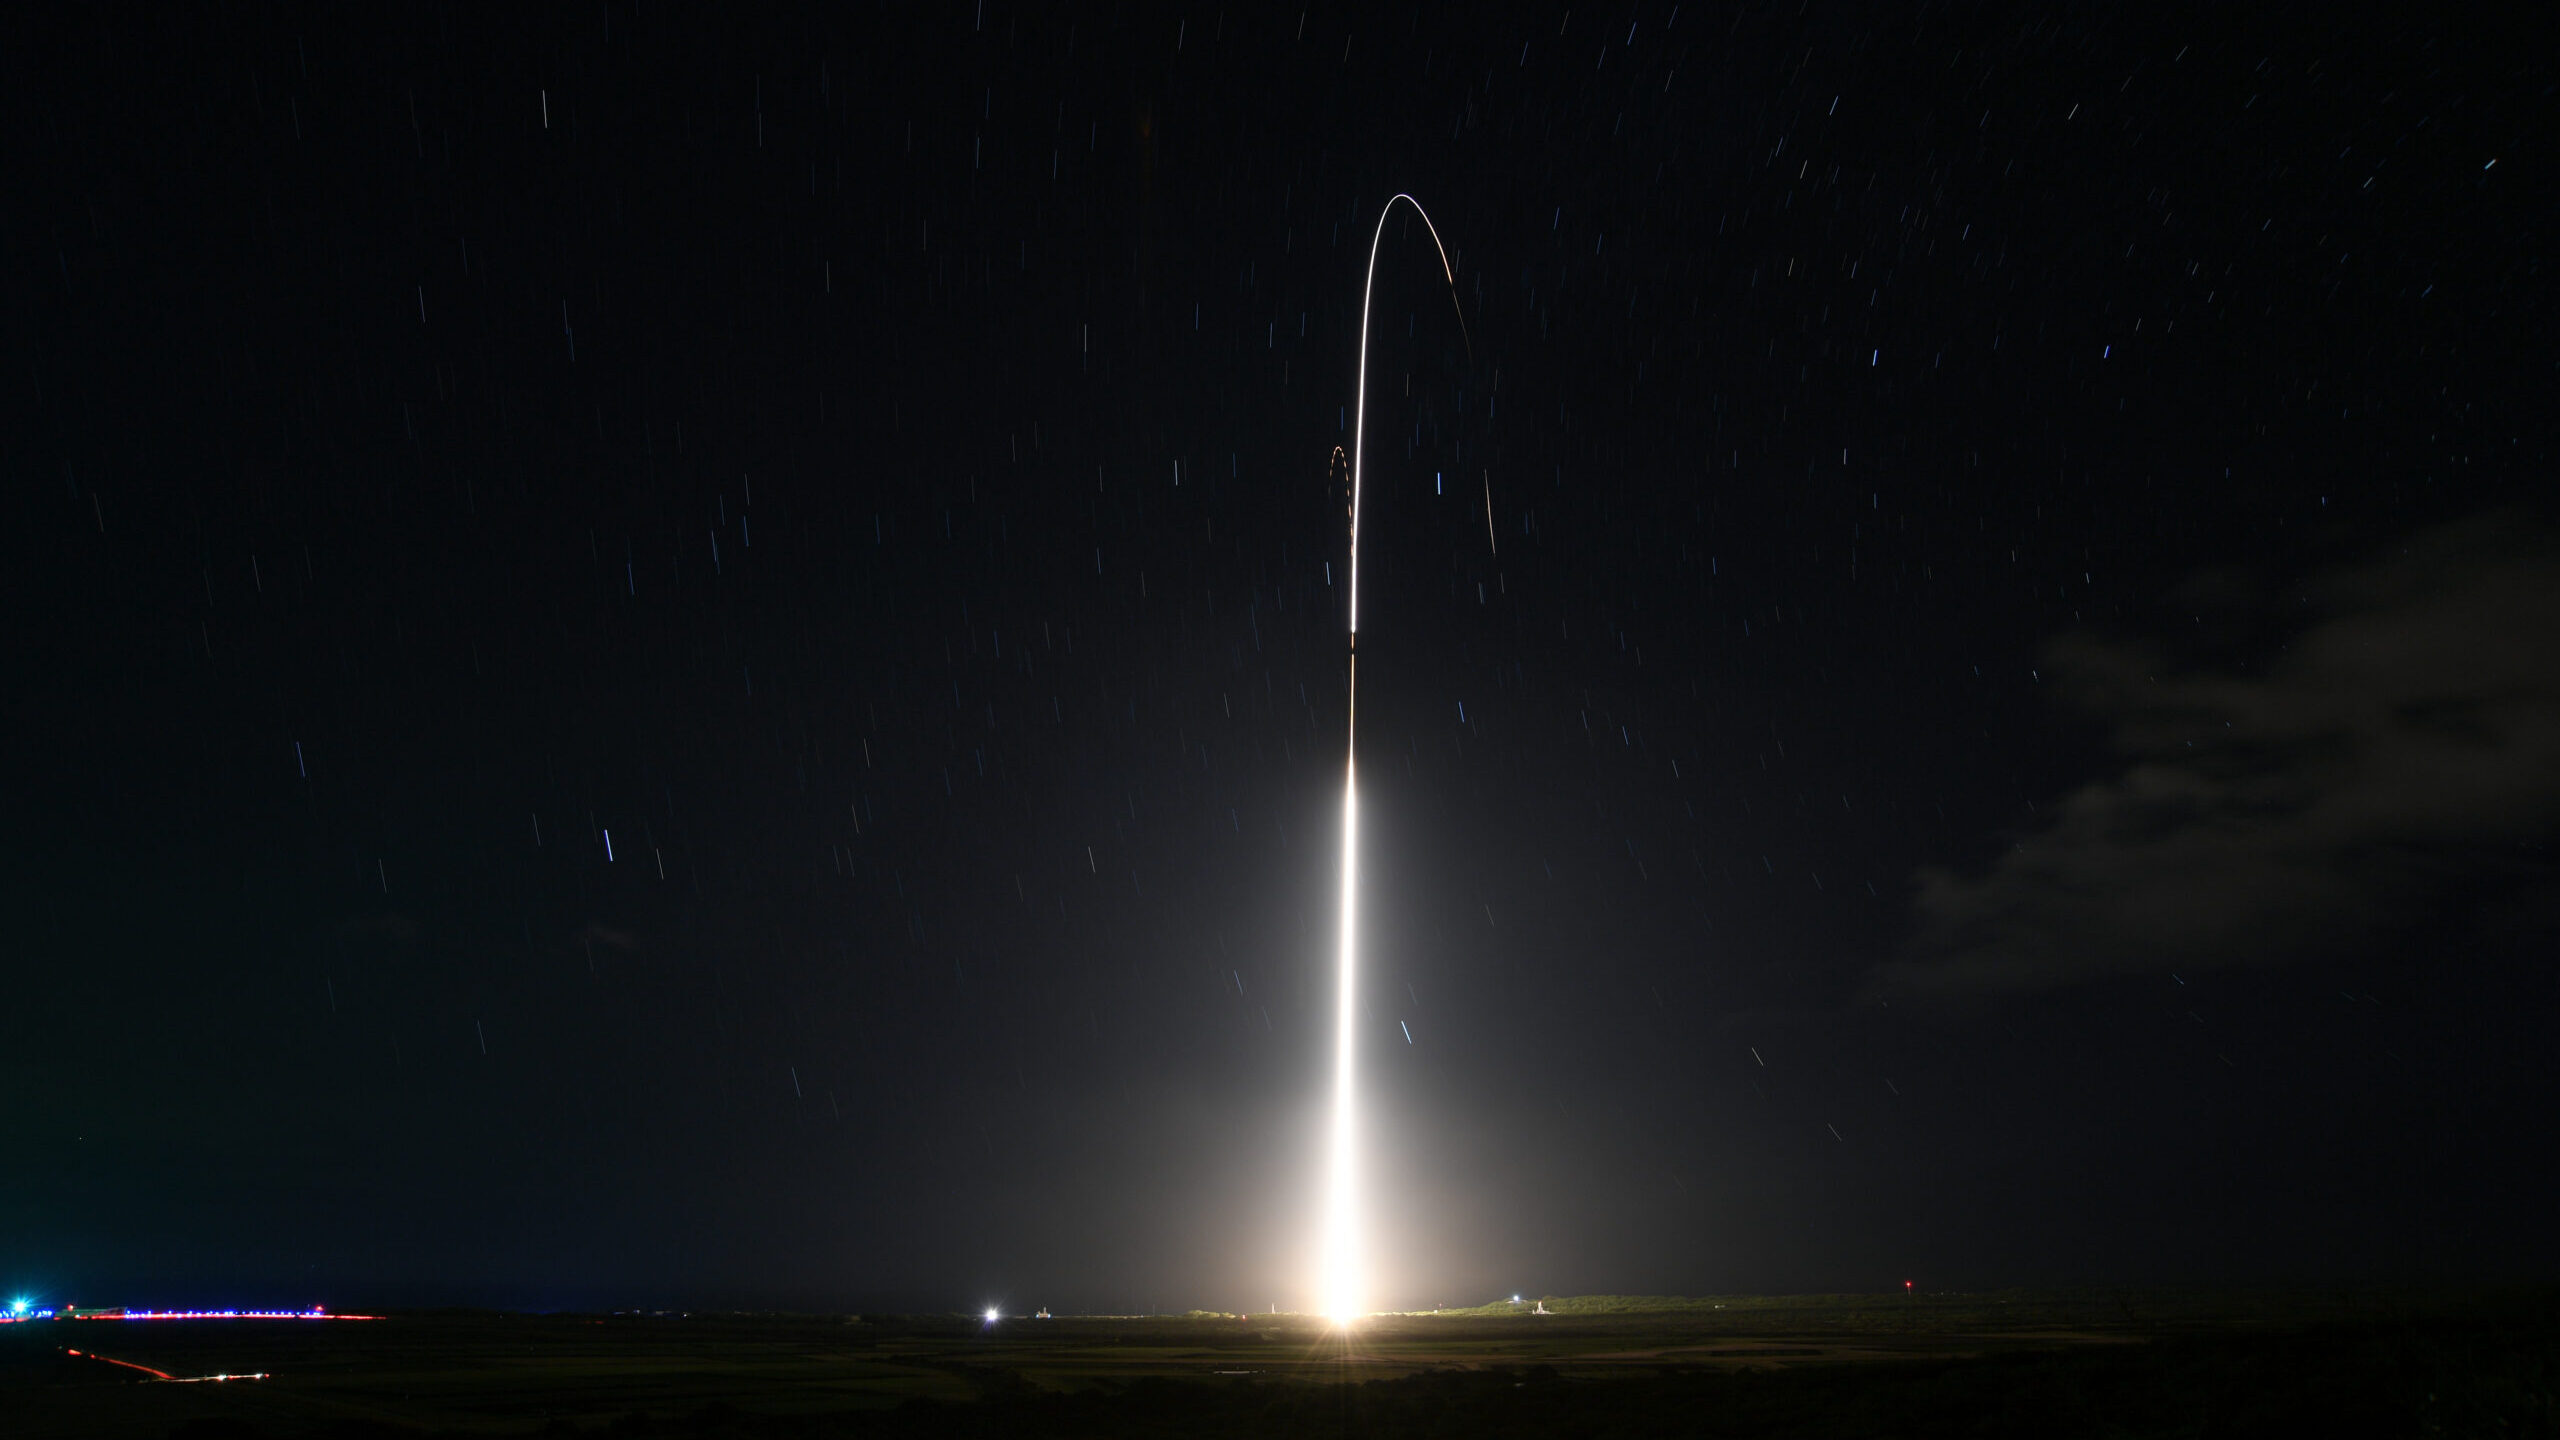 Missile Defense Agency asks Congress for $9.6B, then announces successful THAAD test